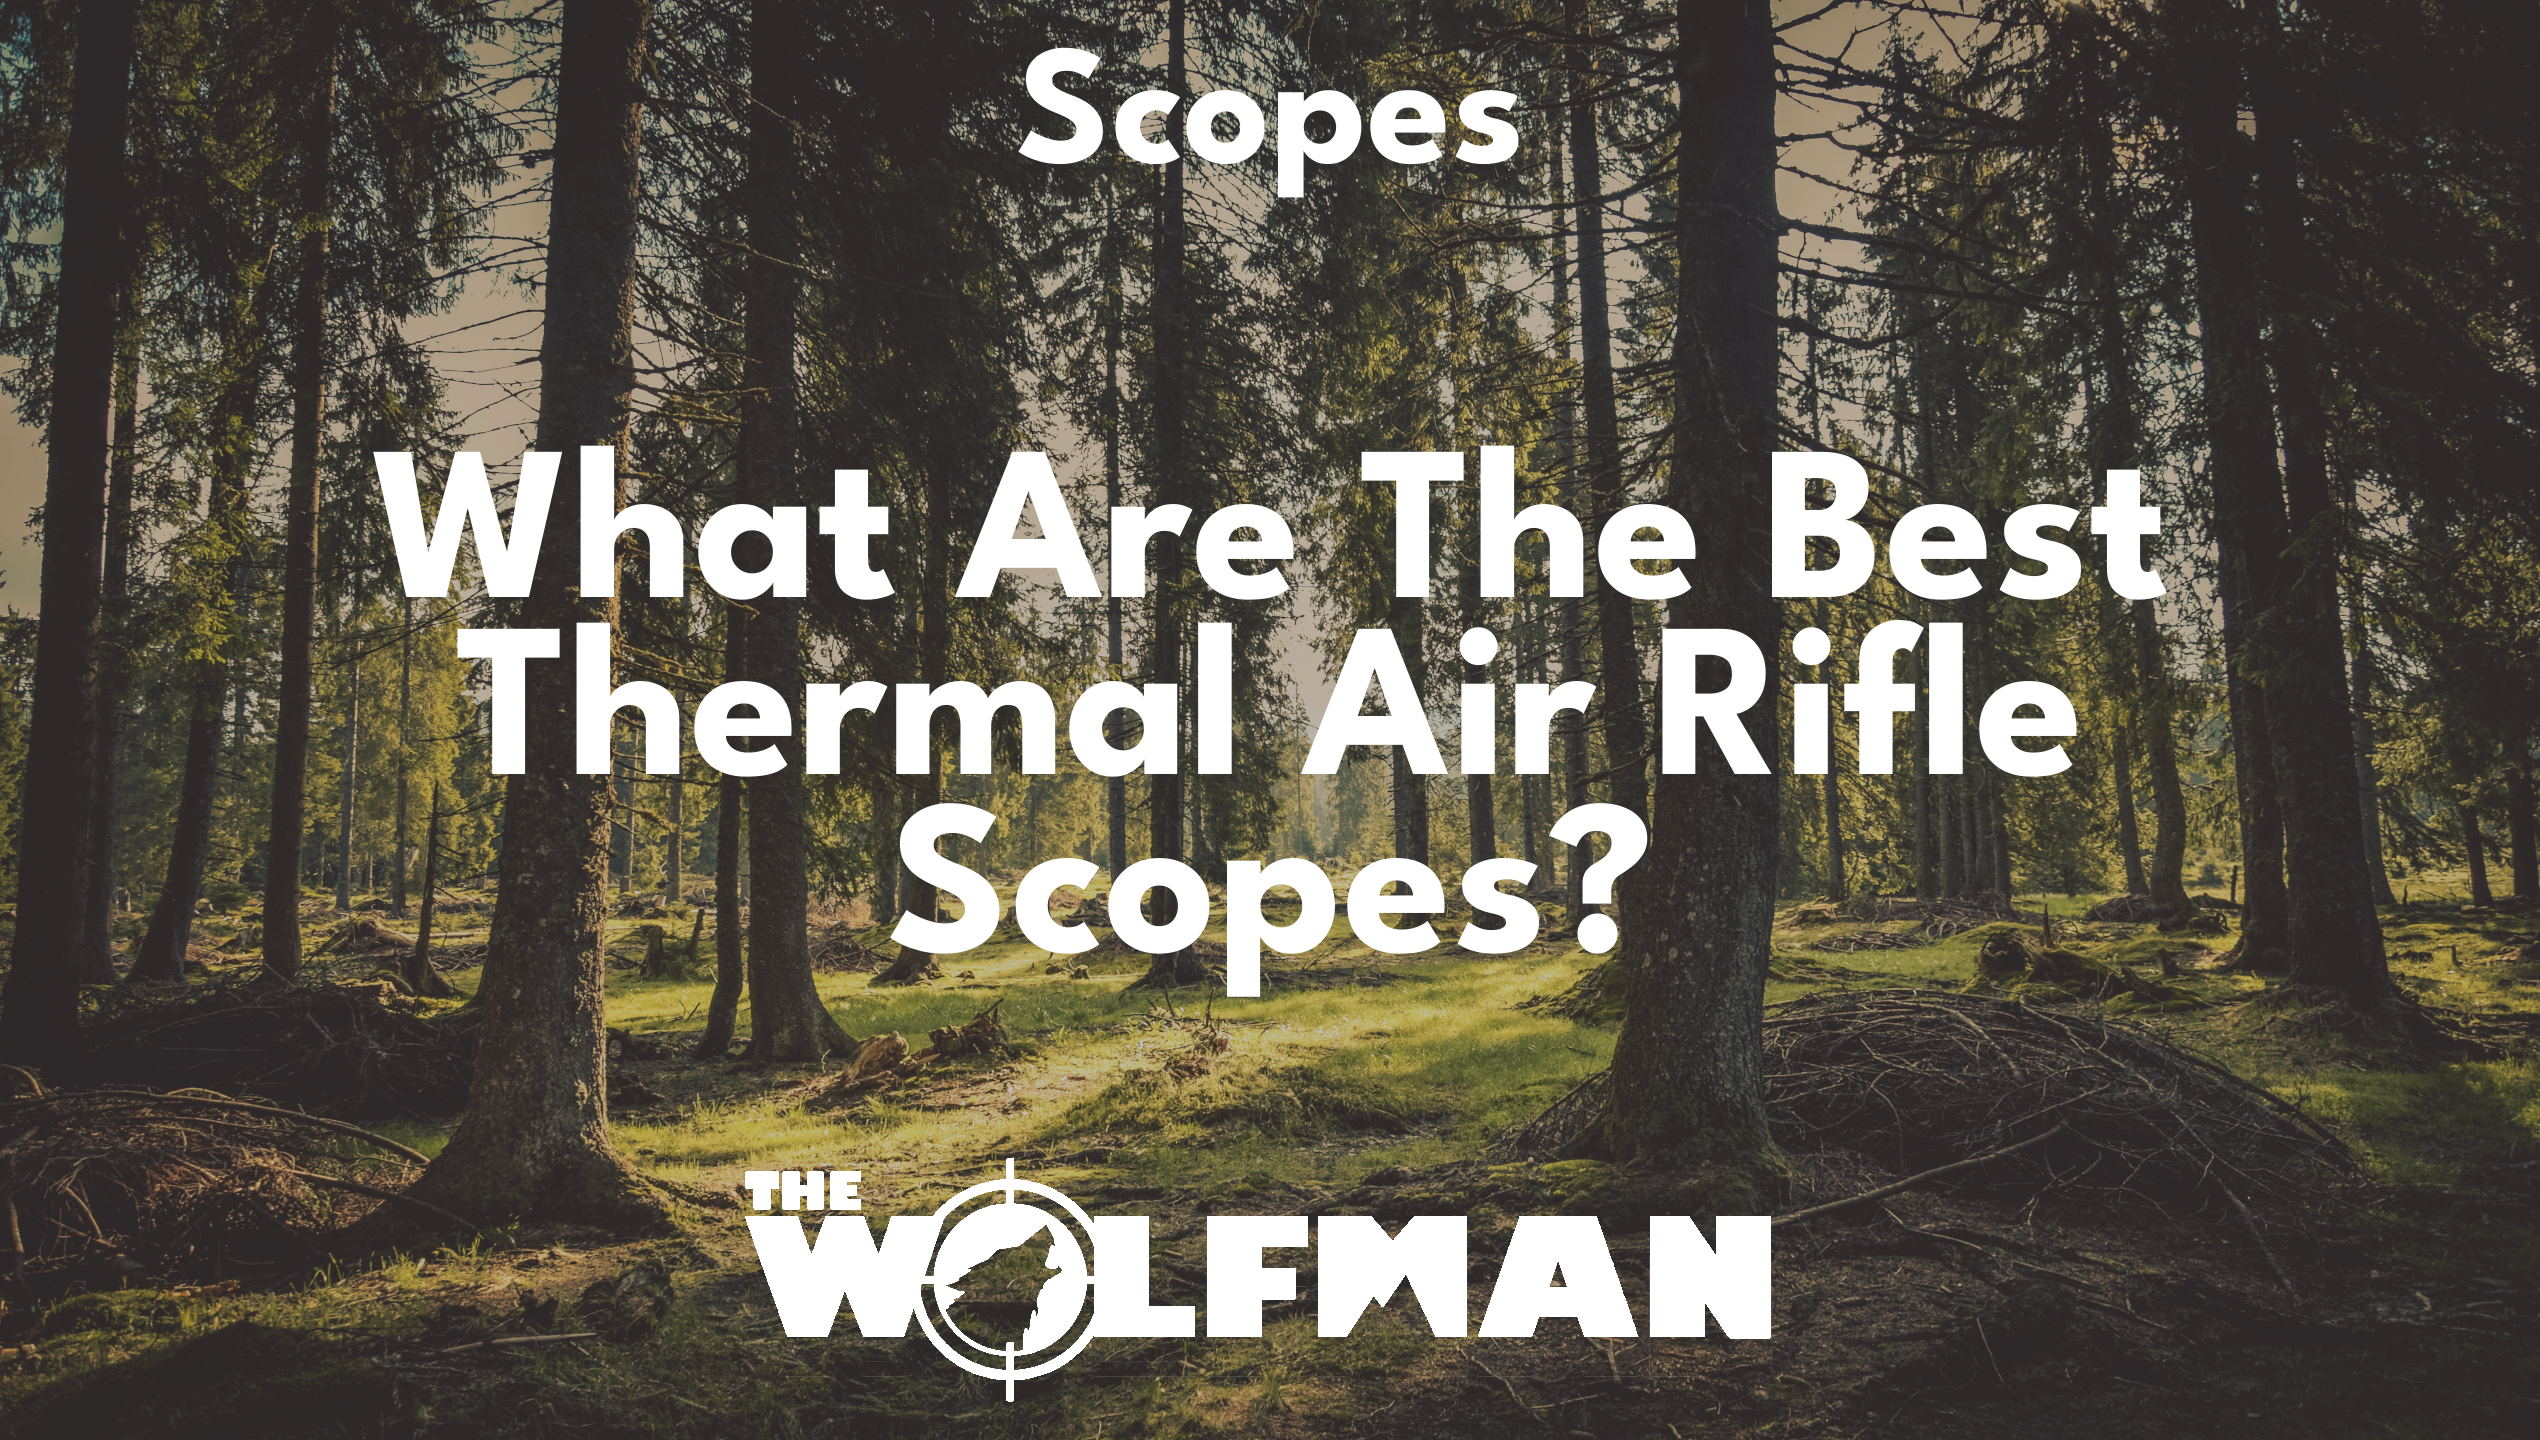 What Are The Best Thermal Air Rifle Scopes? — The Wolfman